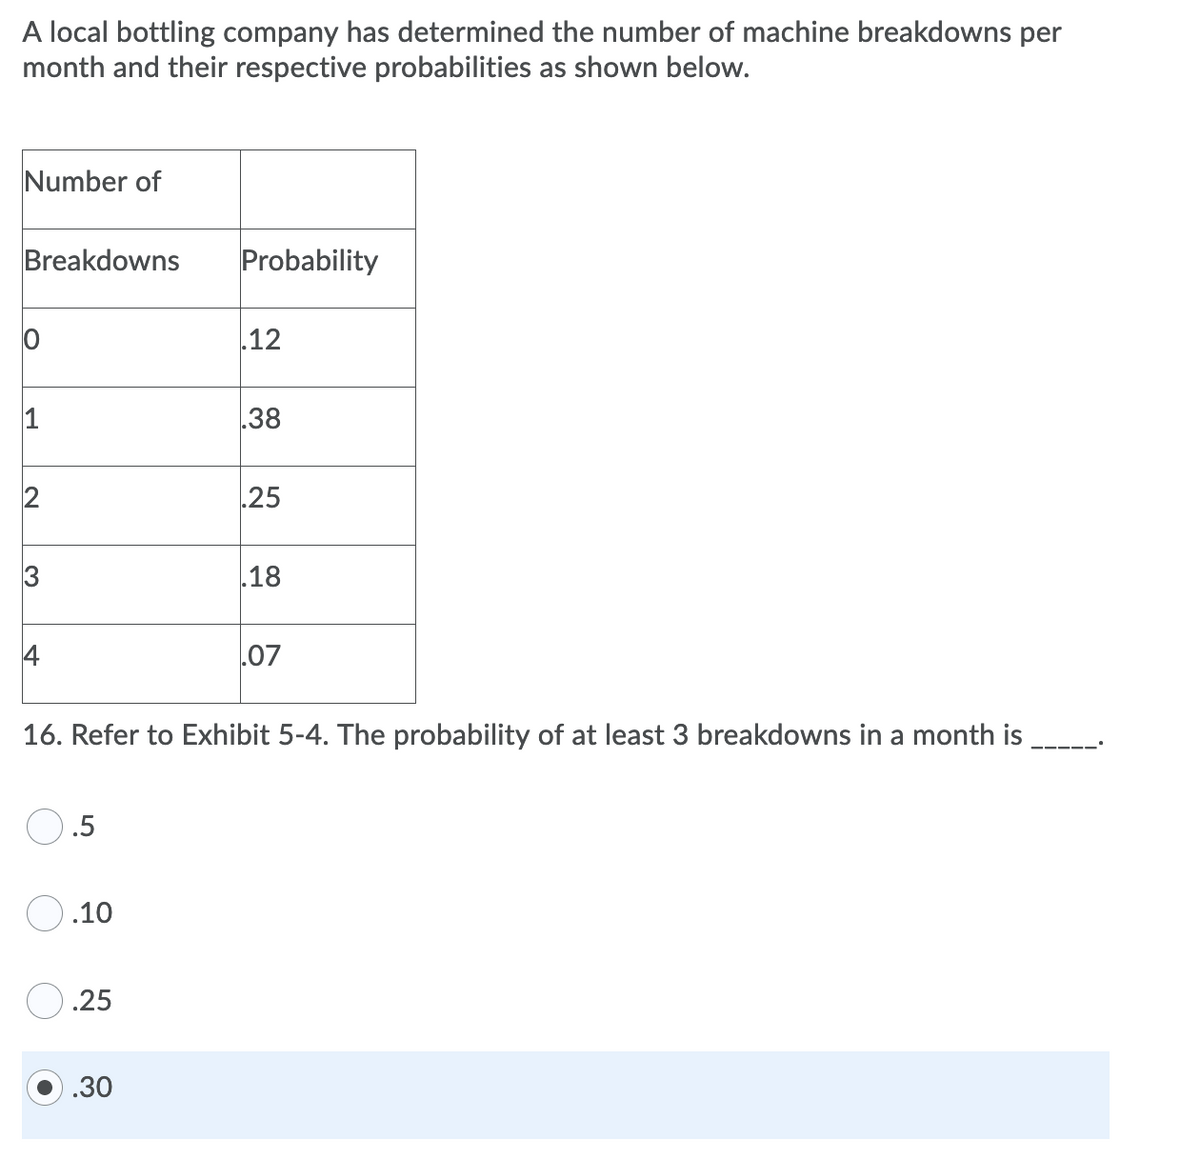 A local bottling company has determined the number of machine breakdowns per
month and their respective probabilities as shown below.
Number of
Breakdowns
Probability
12
38
25
.18
07
16. Refer to Exhibit 5-4. The probability of at least 3 breakdowns in a month is
.5
.10
.25
.30
2.
